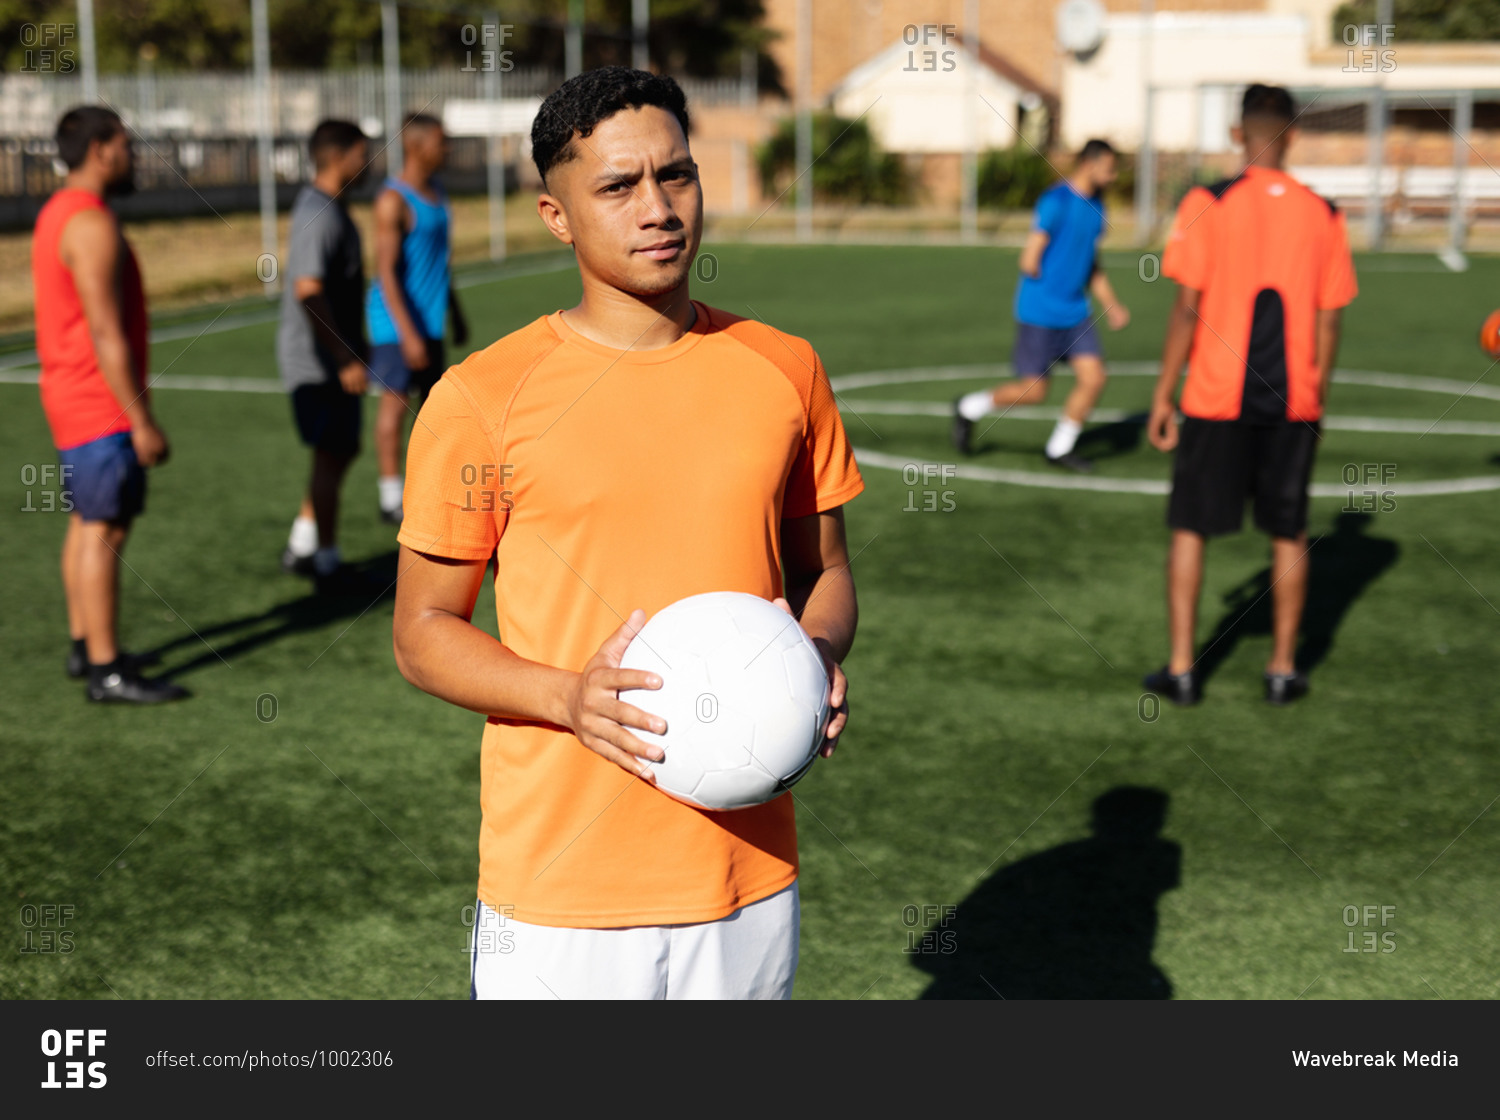 Portrait of focused mixed race male five a side football player wearing sports clothes training at a sports field in the sun, holding a ball his teammates warming up in the background.